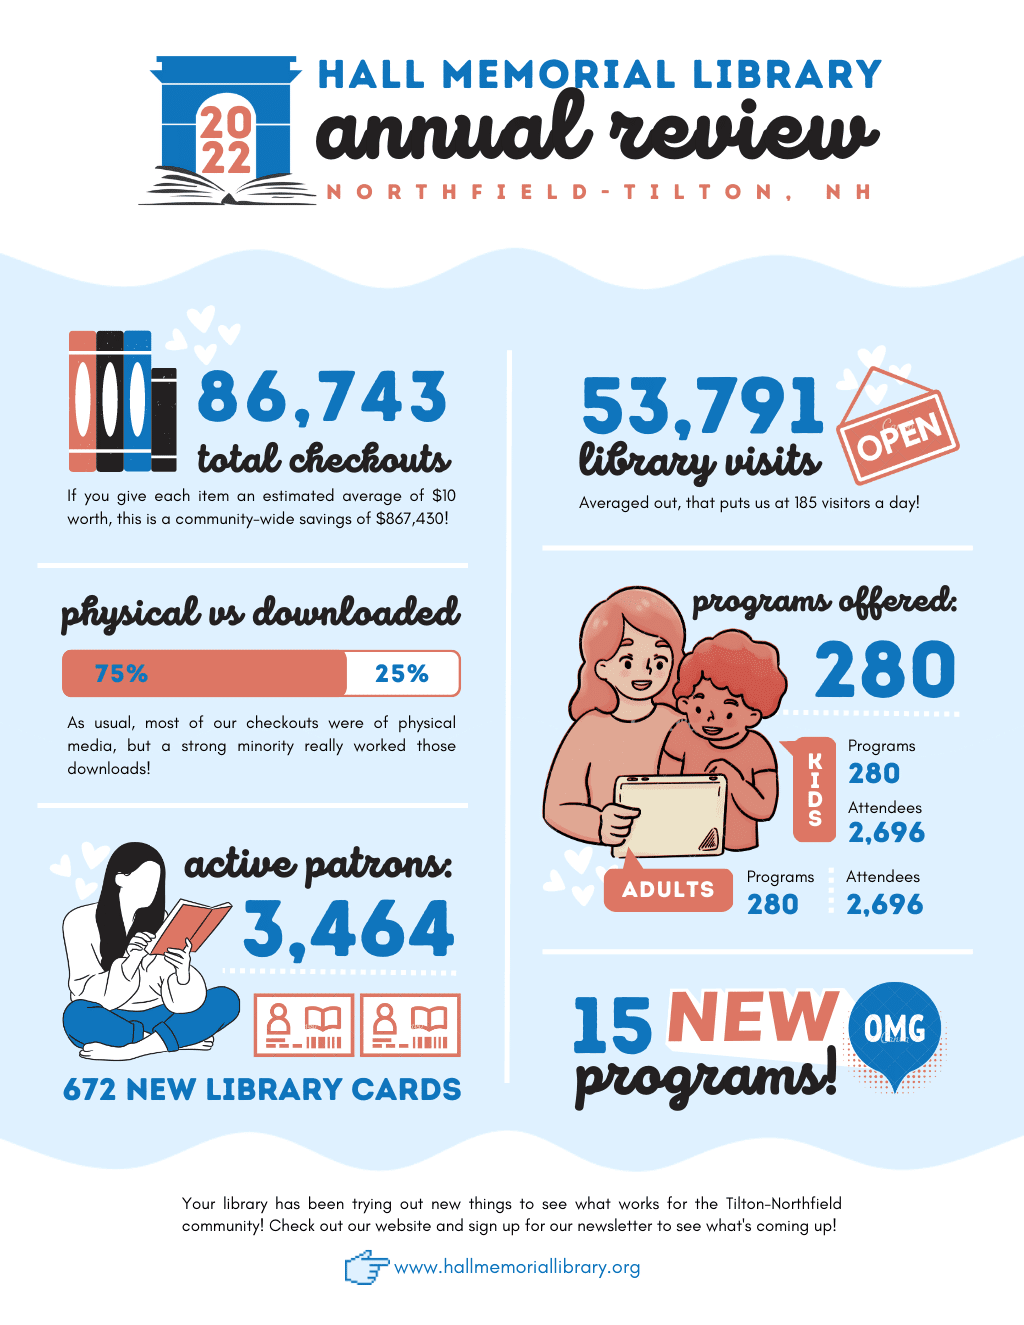 HML annual review infographic